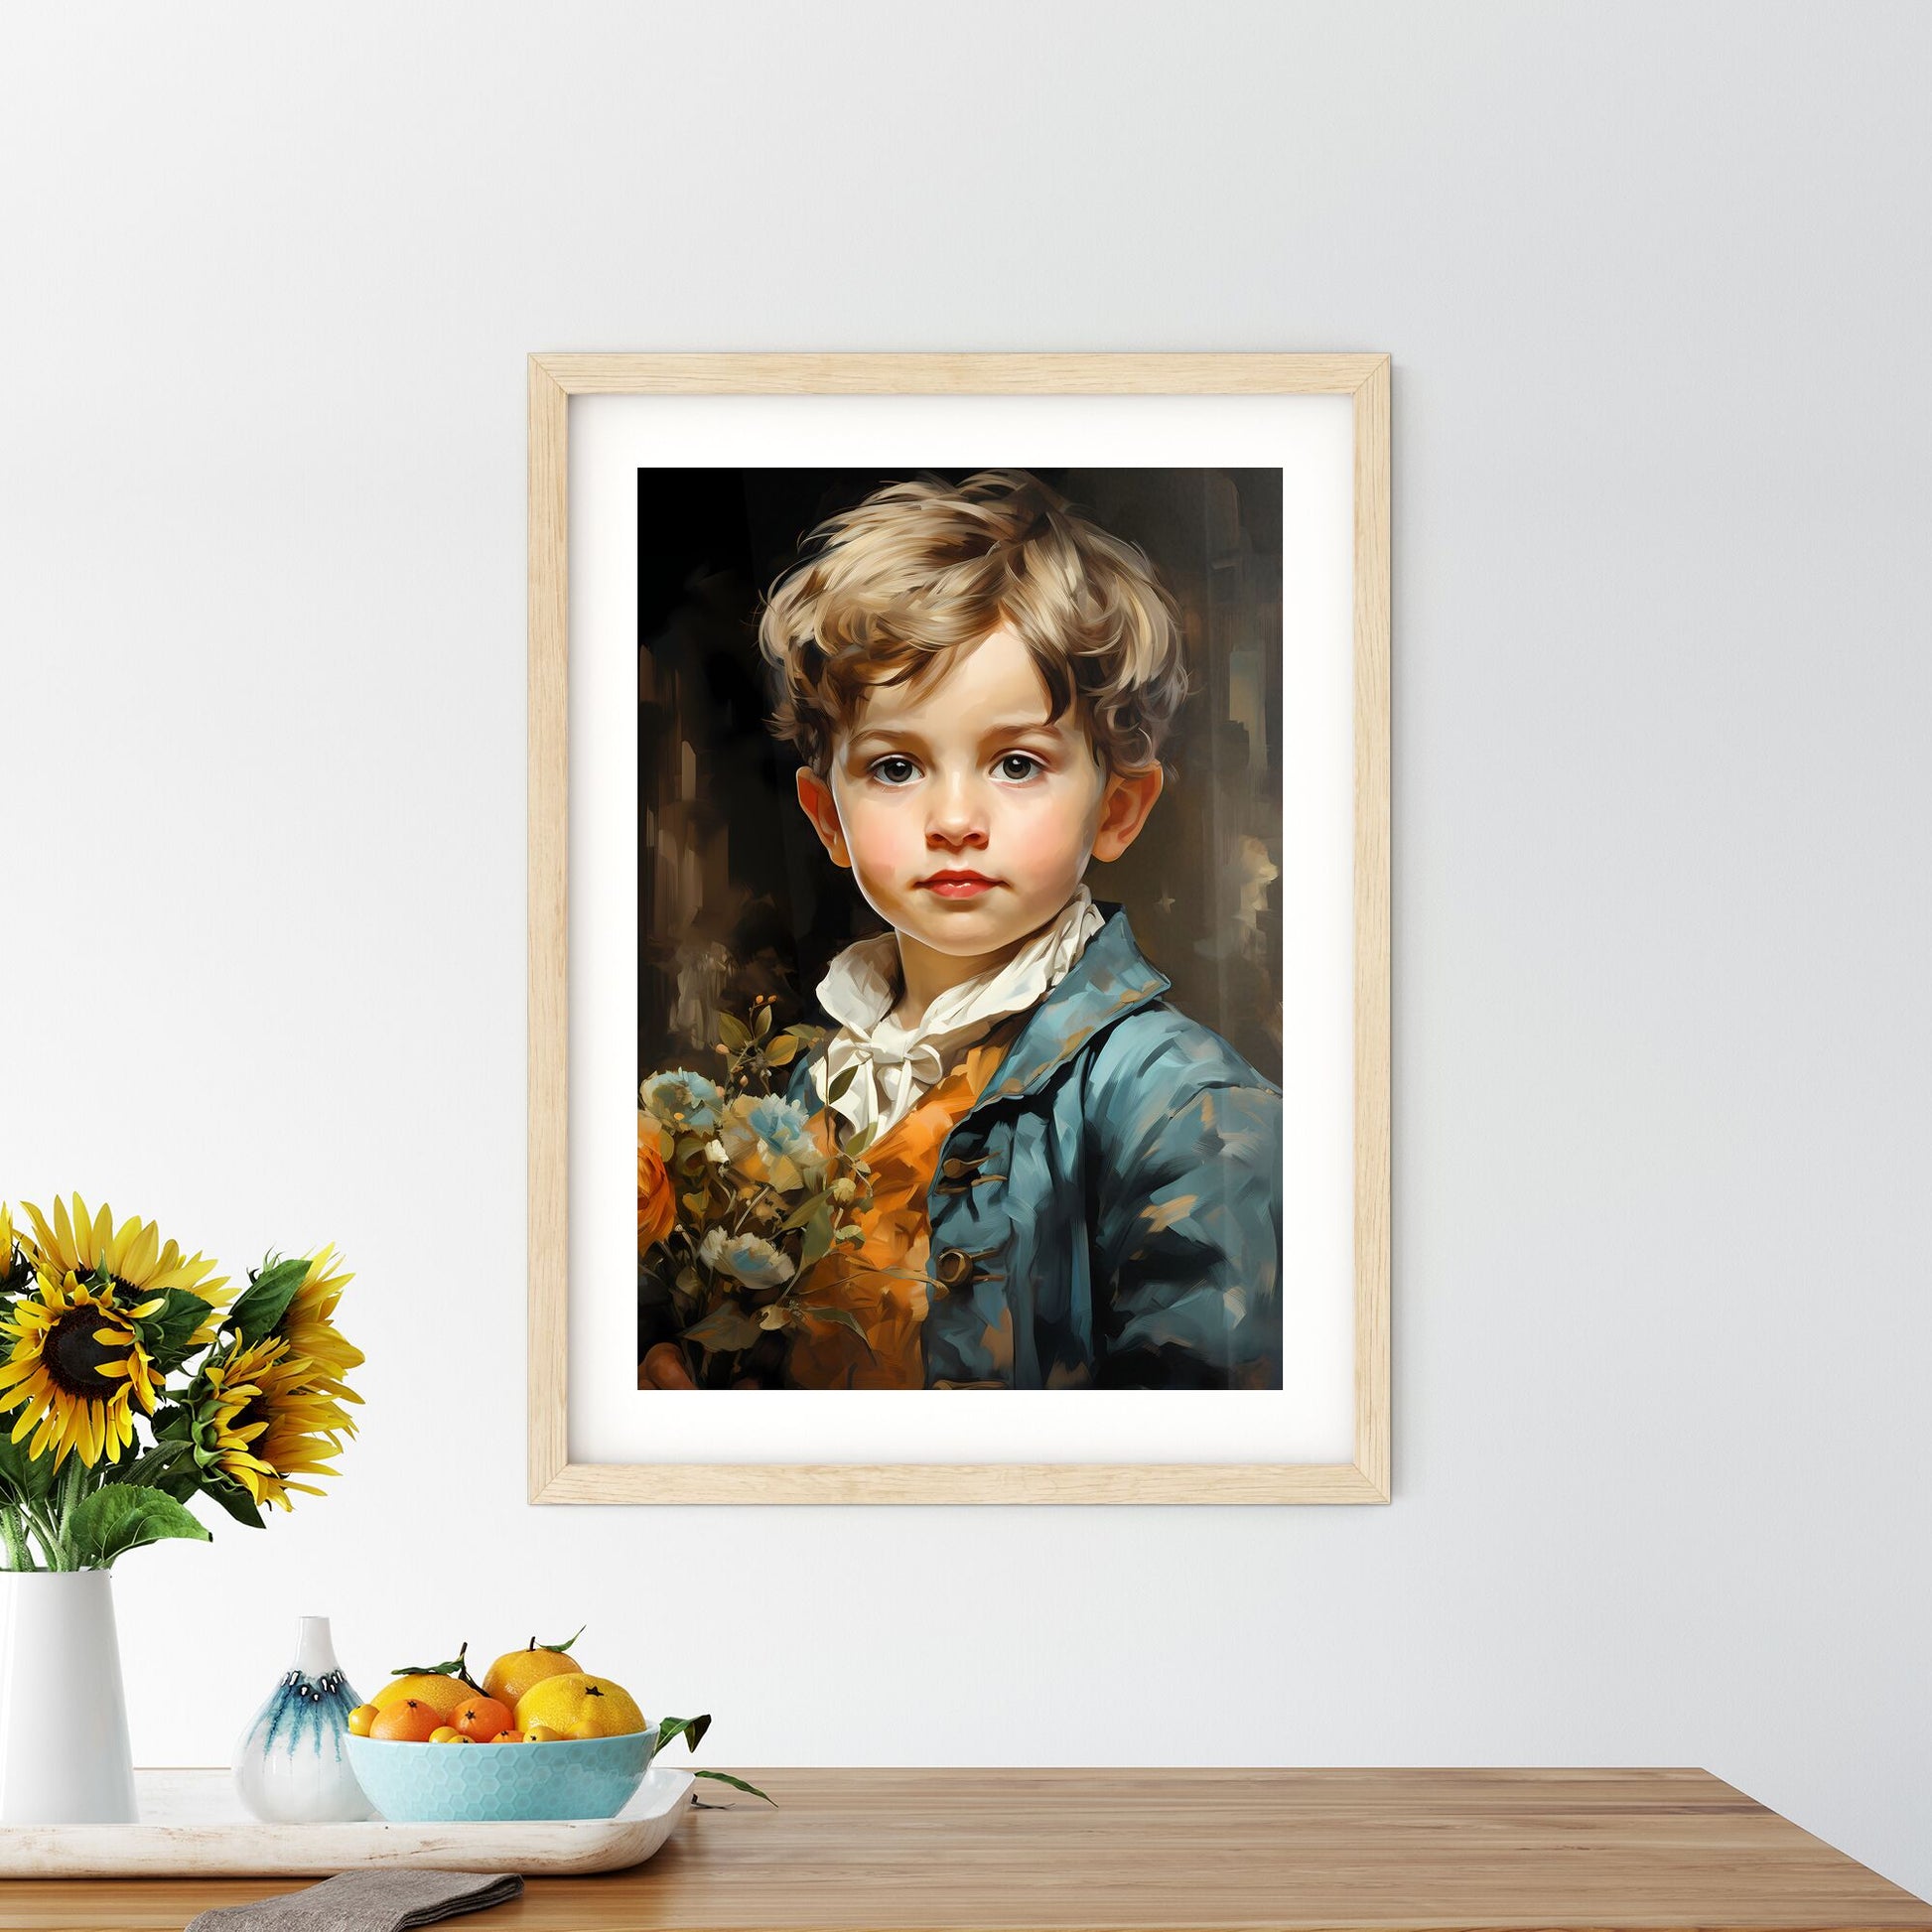 Baby Boy Posing For His First Portrait - A Child Holding Flowers Default Title